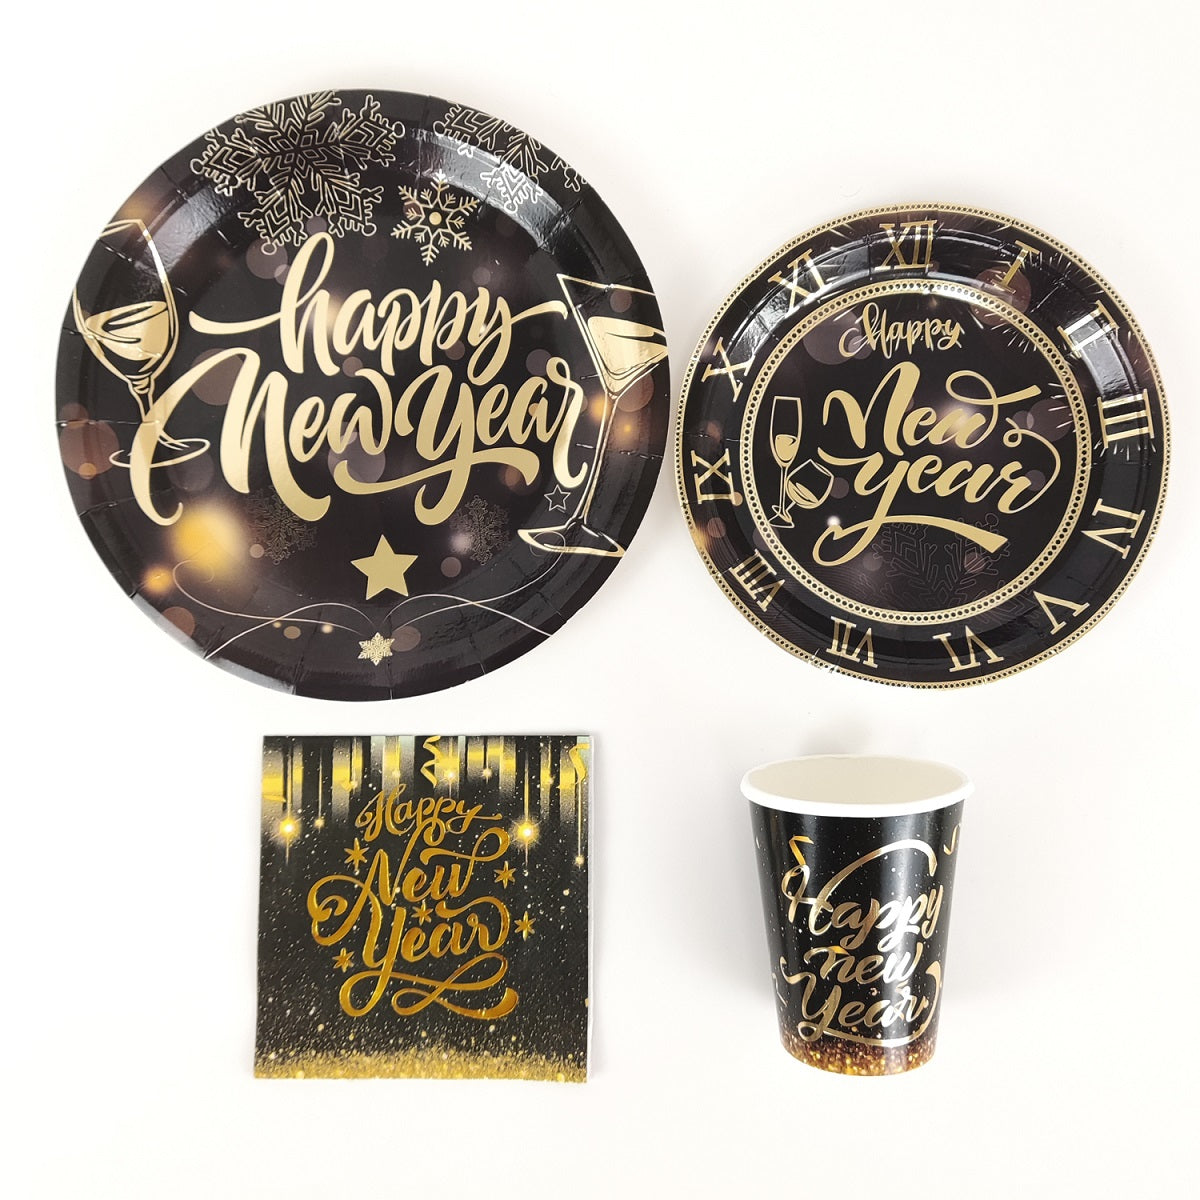 Happy New Year Eve Disposable Paper Party Tableware Set Supply Festive Holiday Decoration